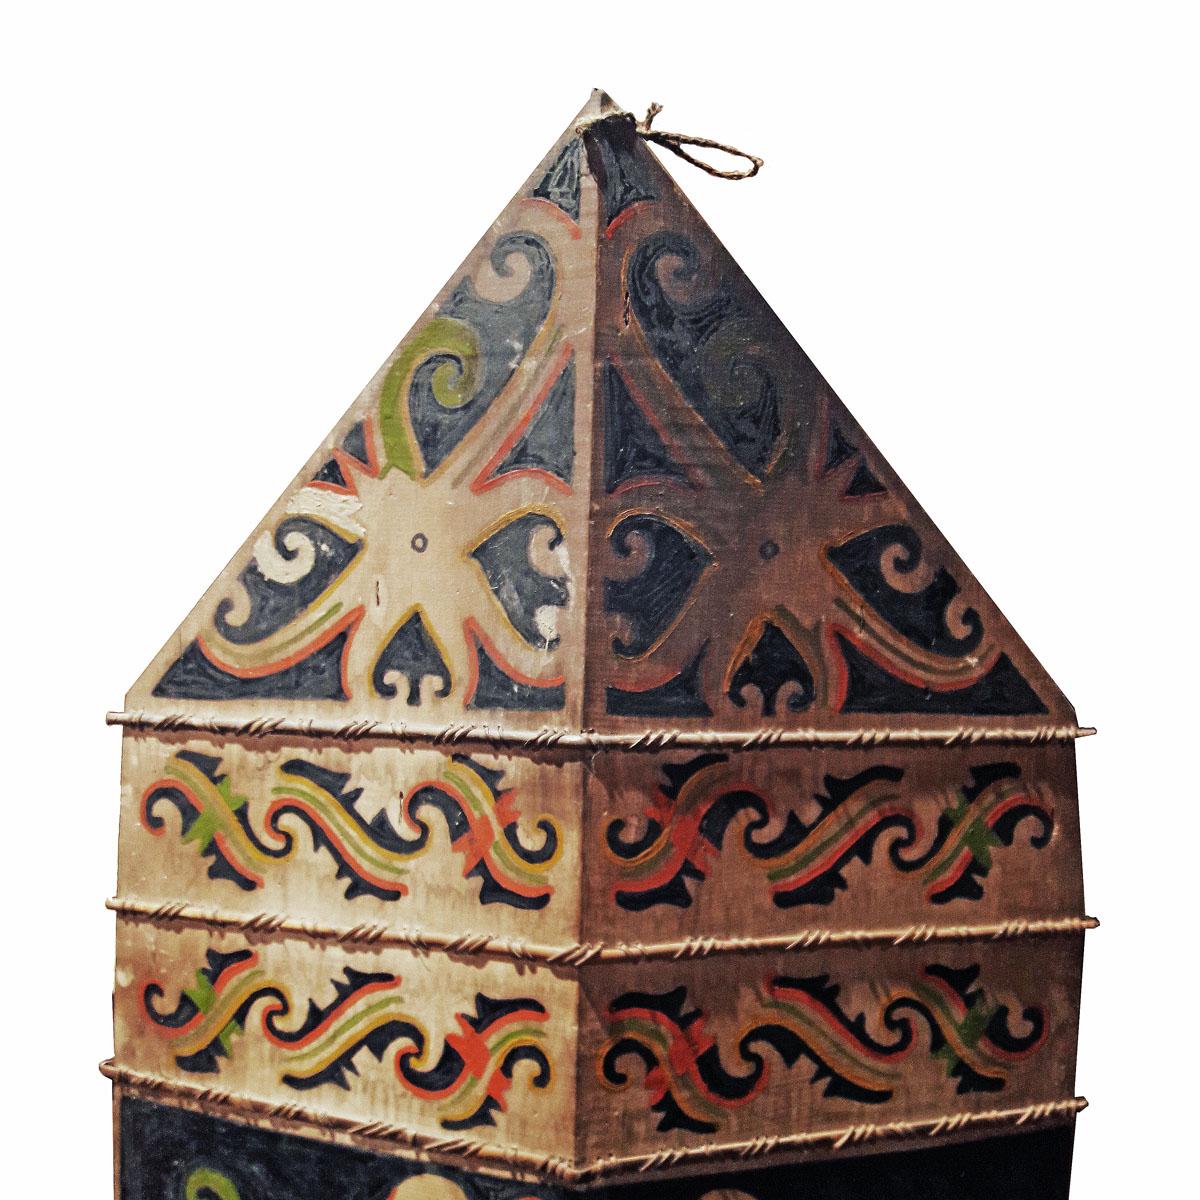 A polychromed, hand-carved shield, circa 1940, from the region of Indonesian Kalimantan in the island of Borneo. Mounted on a black metal stand. 

Dimensions: Shield alone: 53